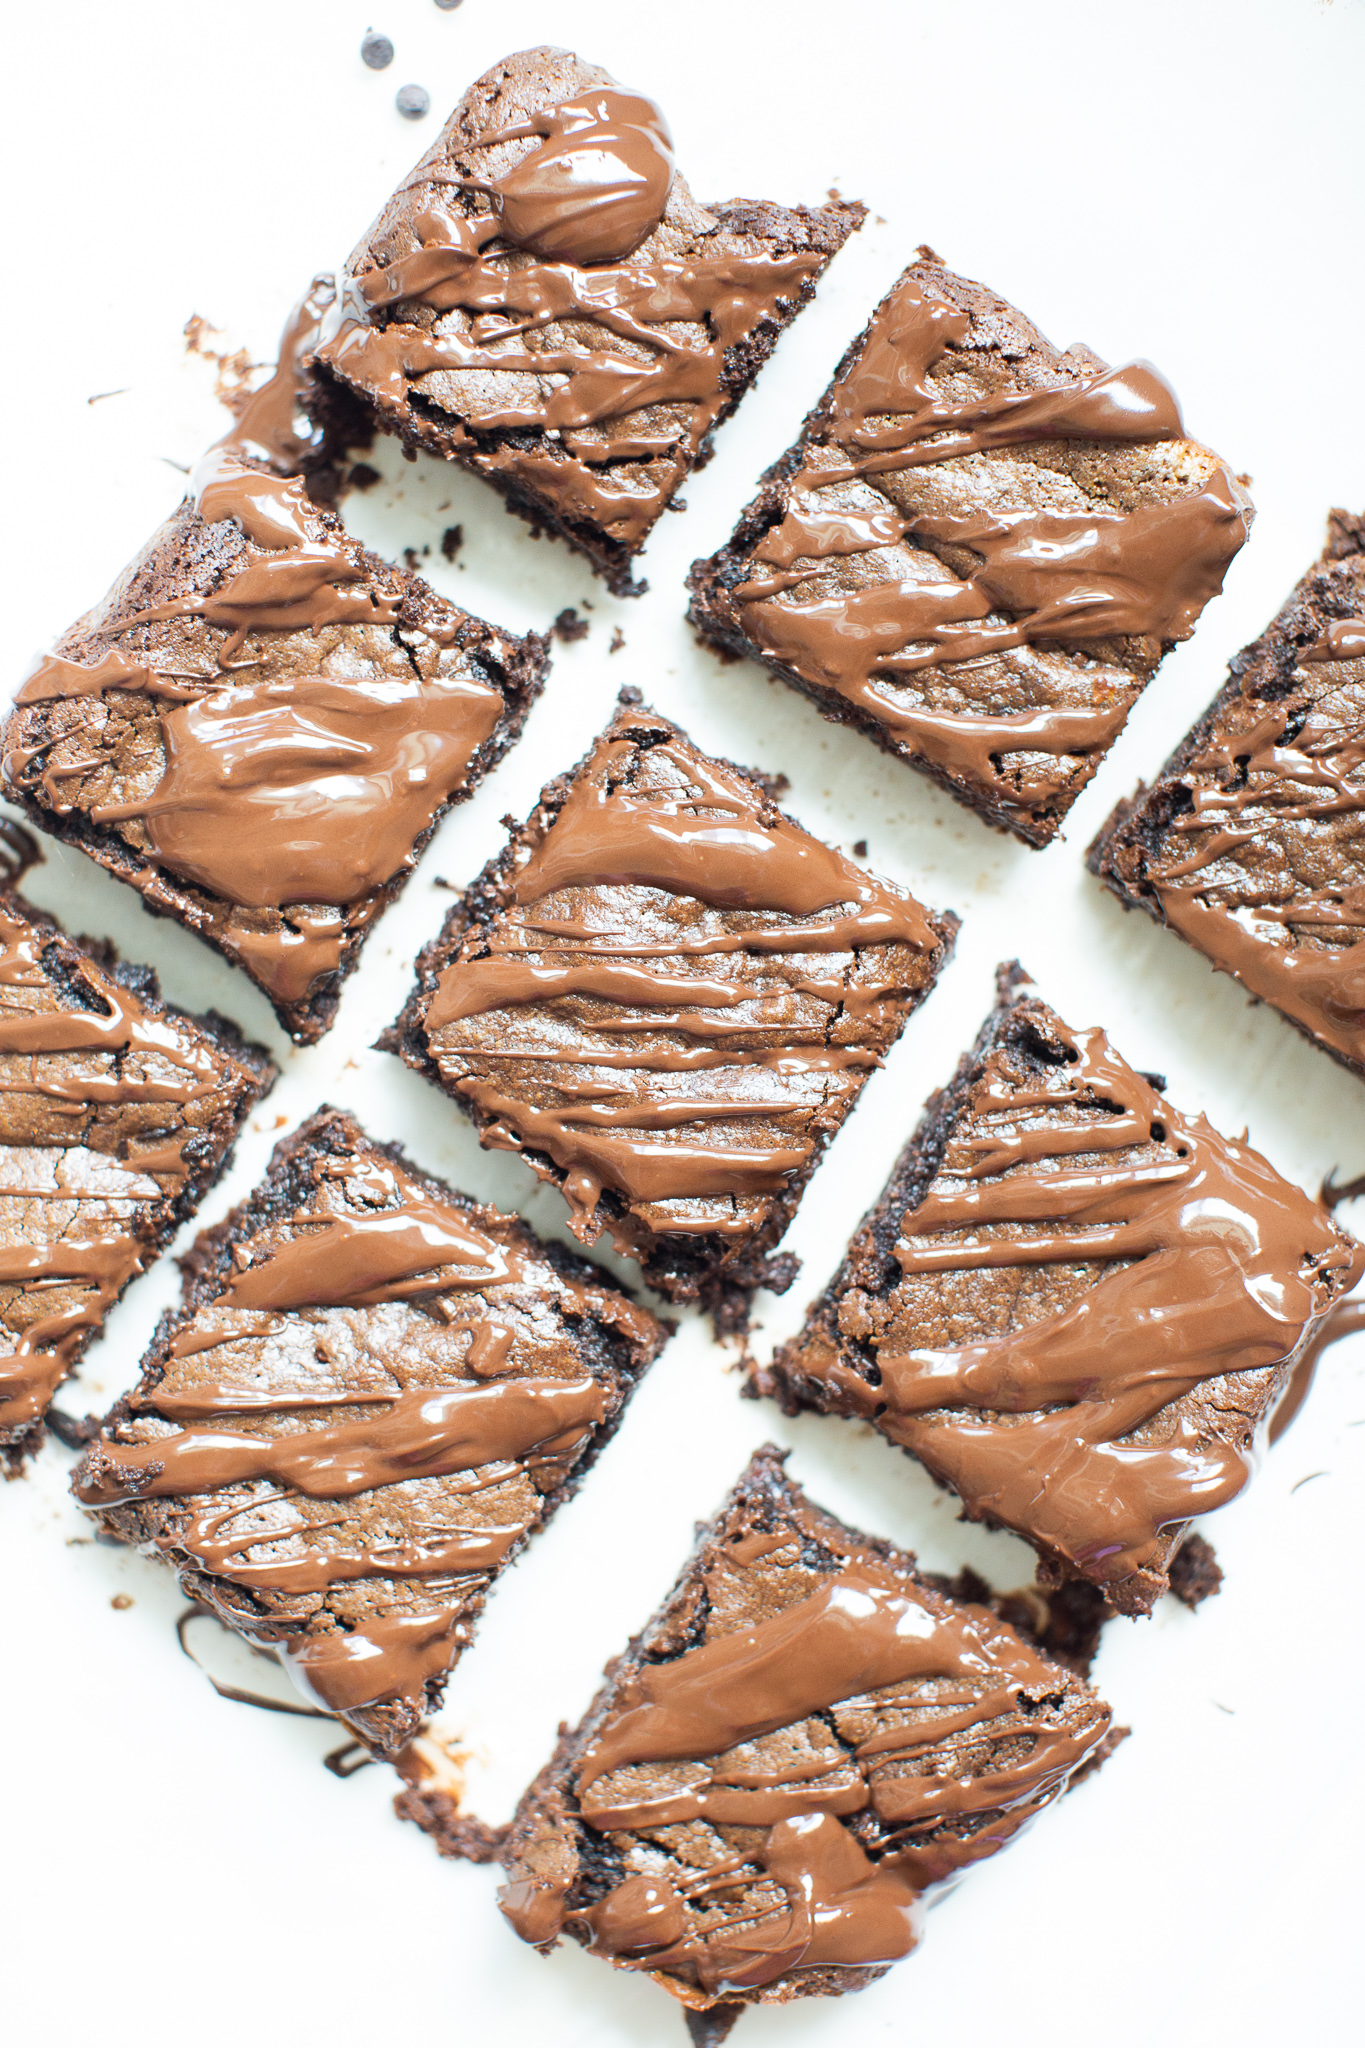 If you've been searching for a guilt-free dessert to satisfy your sweet tooth, then look no further than these magical fudgy tahini brownies. They are easily one of my favorite brownie recipes EVER! #brownies #healthydessert #tahinibrownies #glutenfree #dairyfree #paleo #grainfree | glitterinc.com | @glitterinc